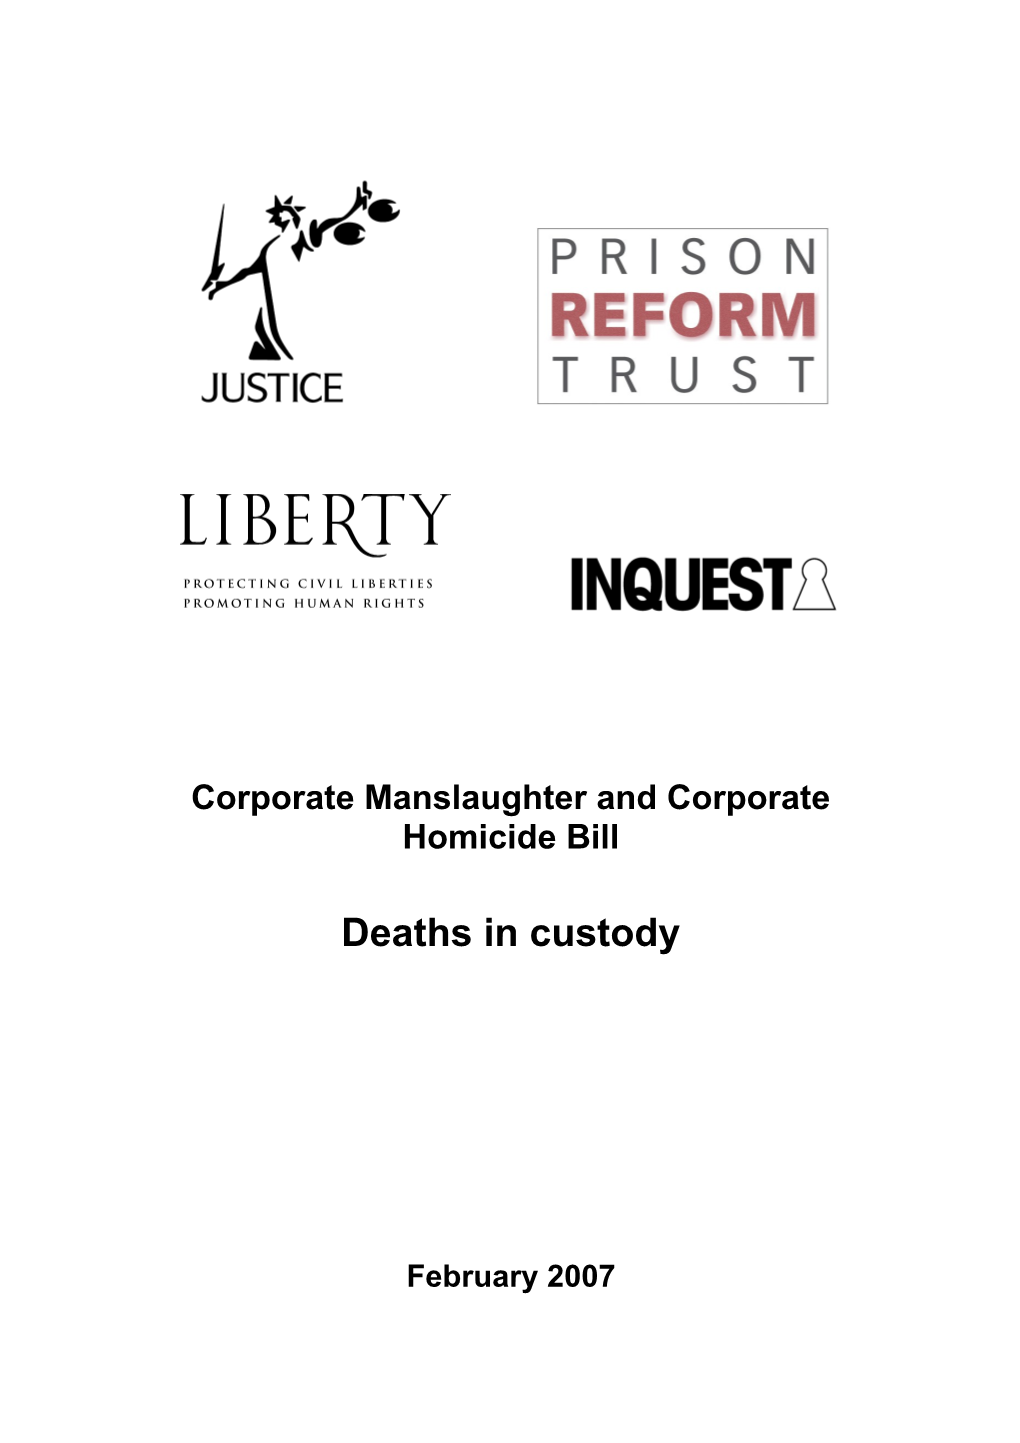 Corporate Manslaughter and Corporate Homicide Bill